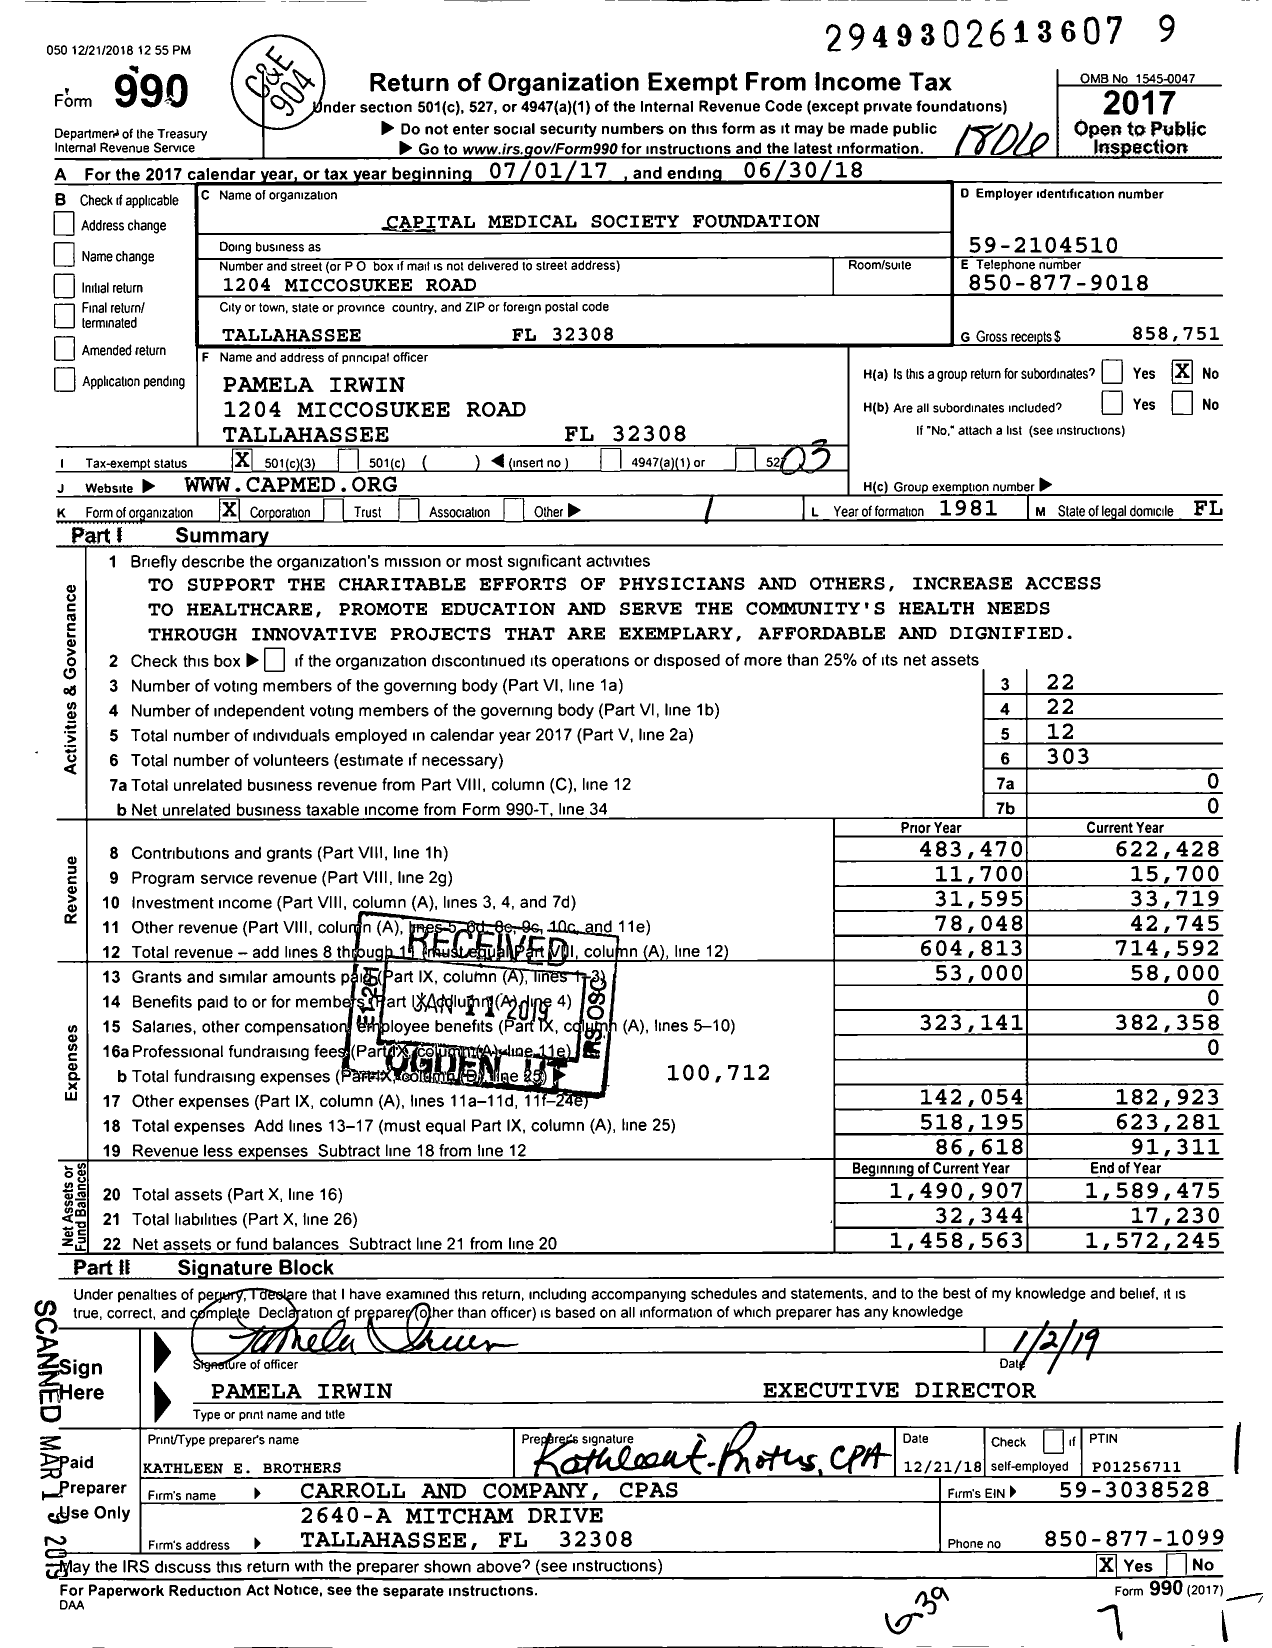 Image of first page of 2017 Form 990 for Capital Medical Society Foundation